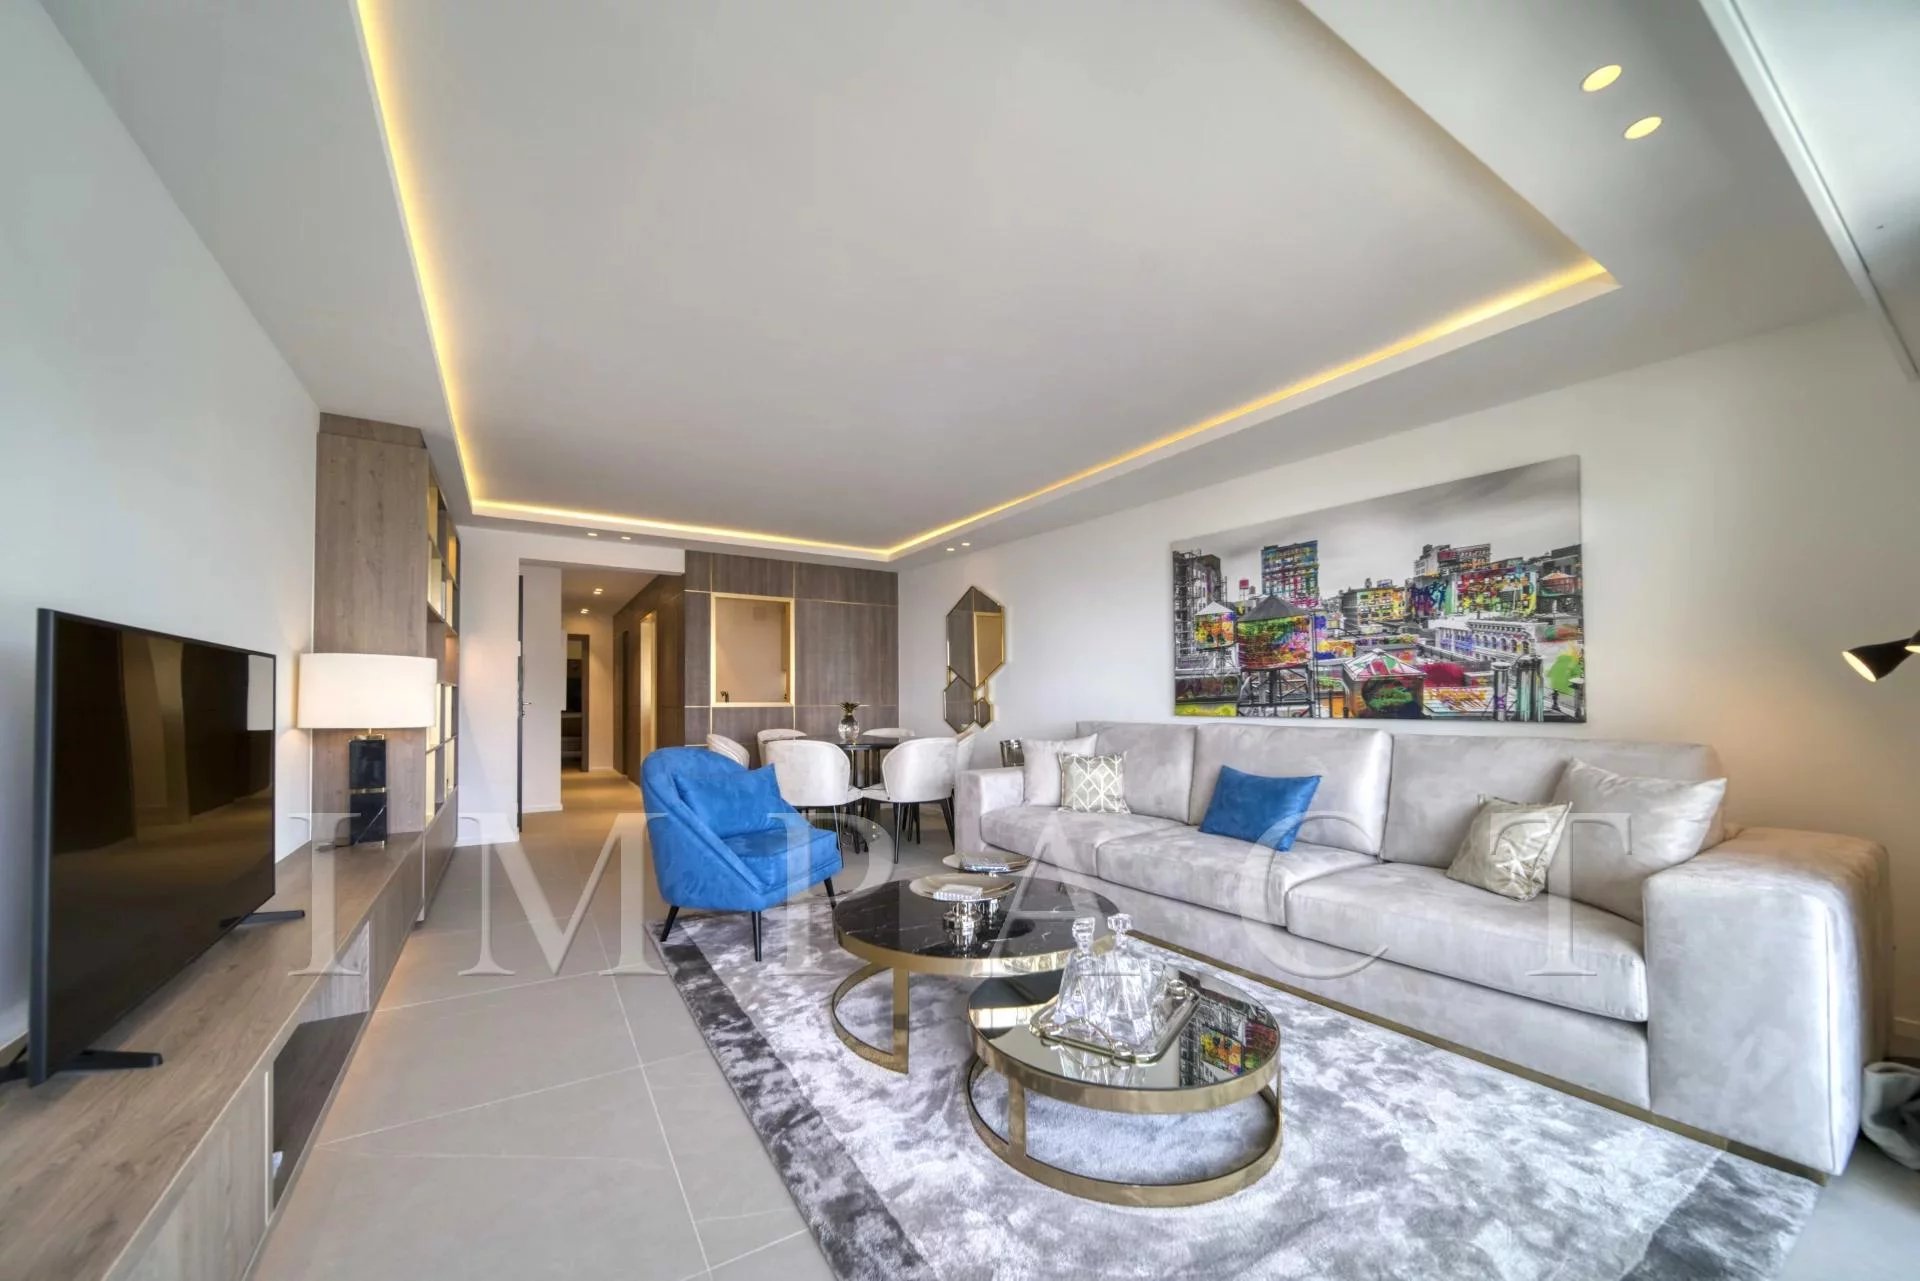 Brand new apartment for rent with sea view, Cannes Croisette